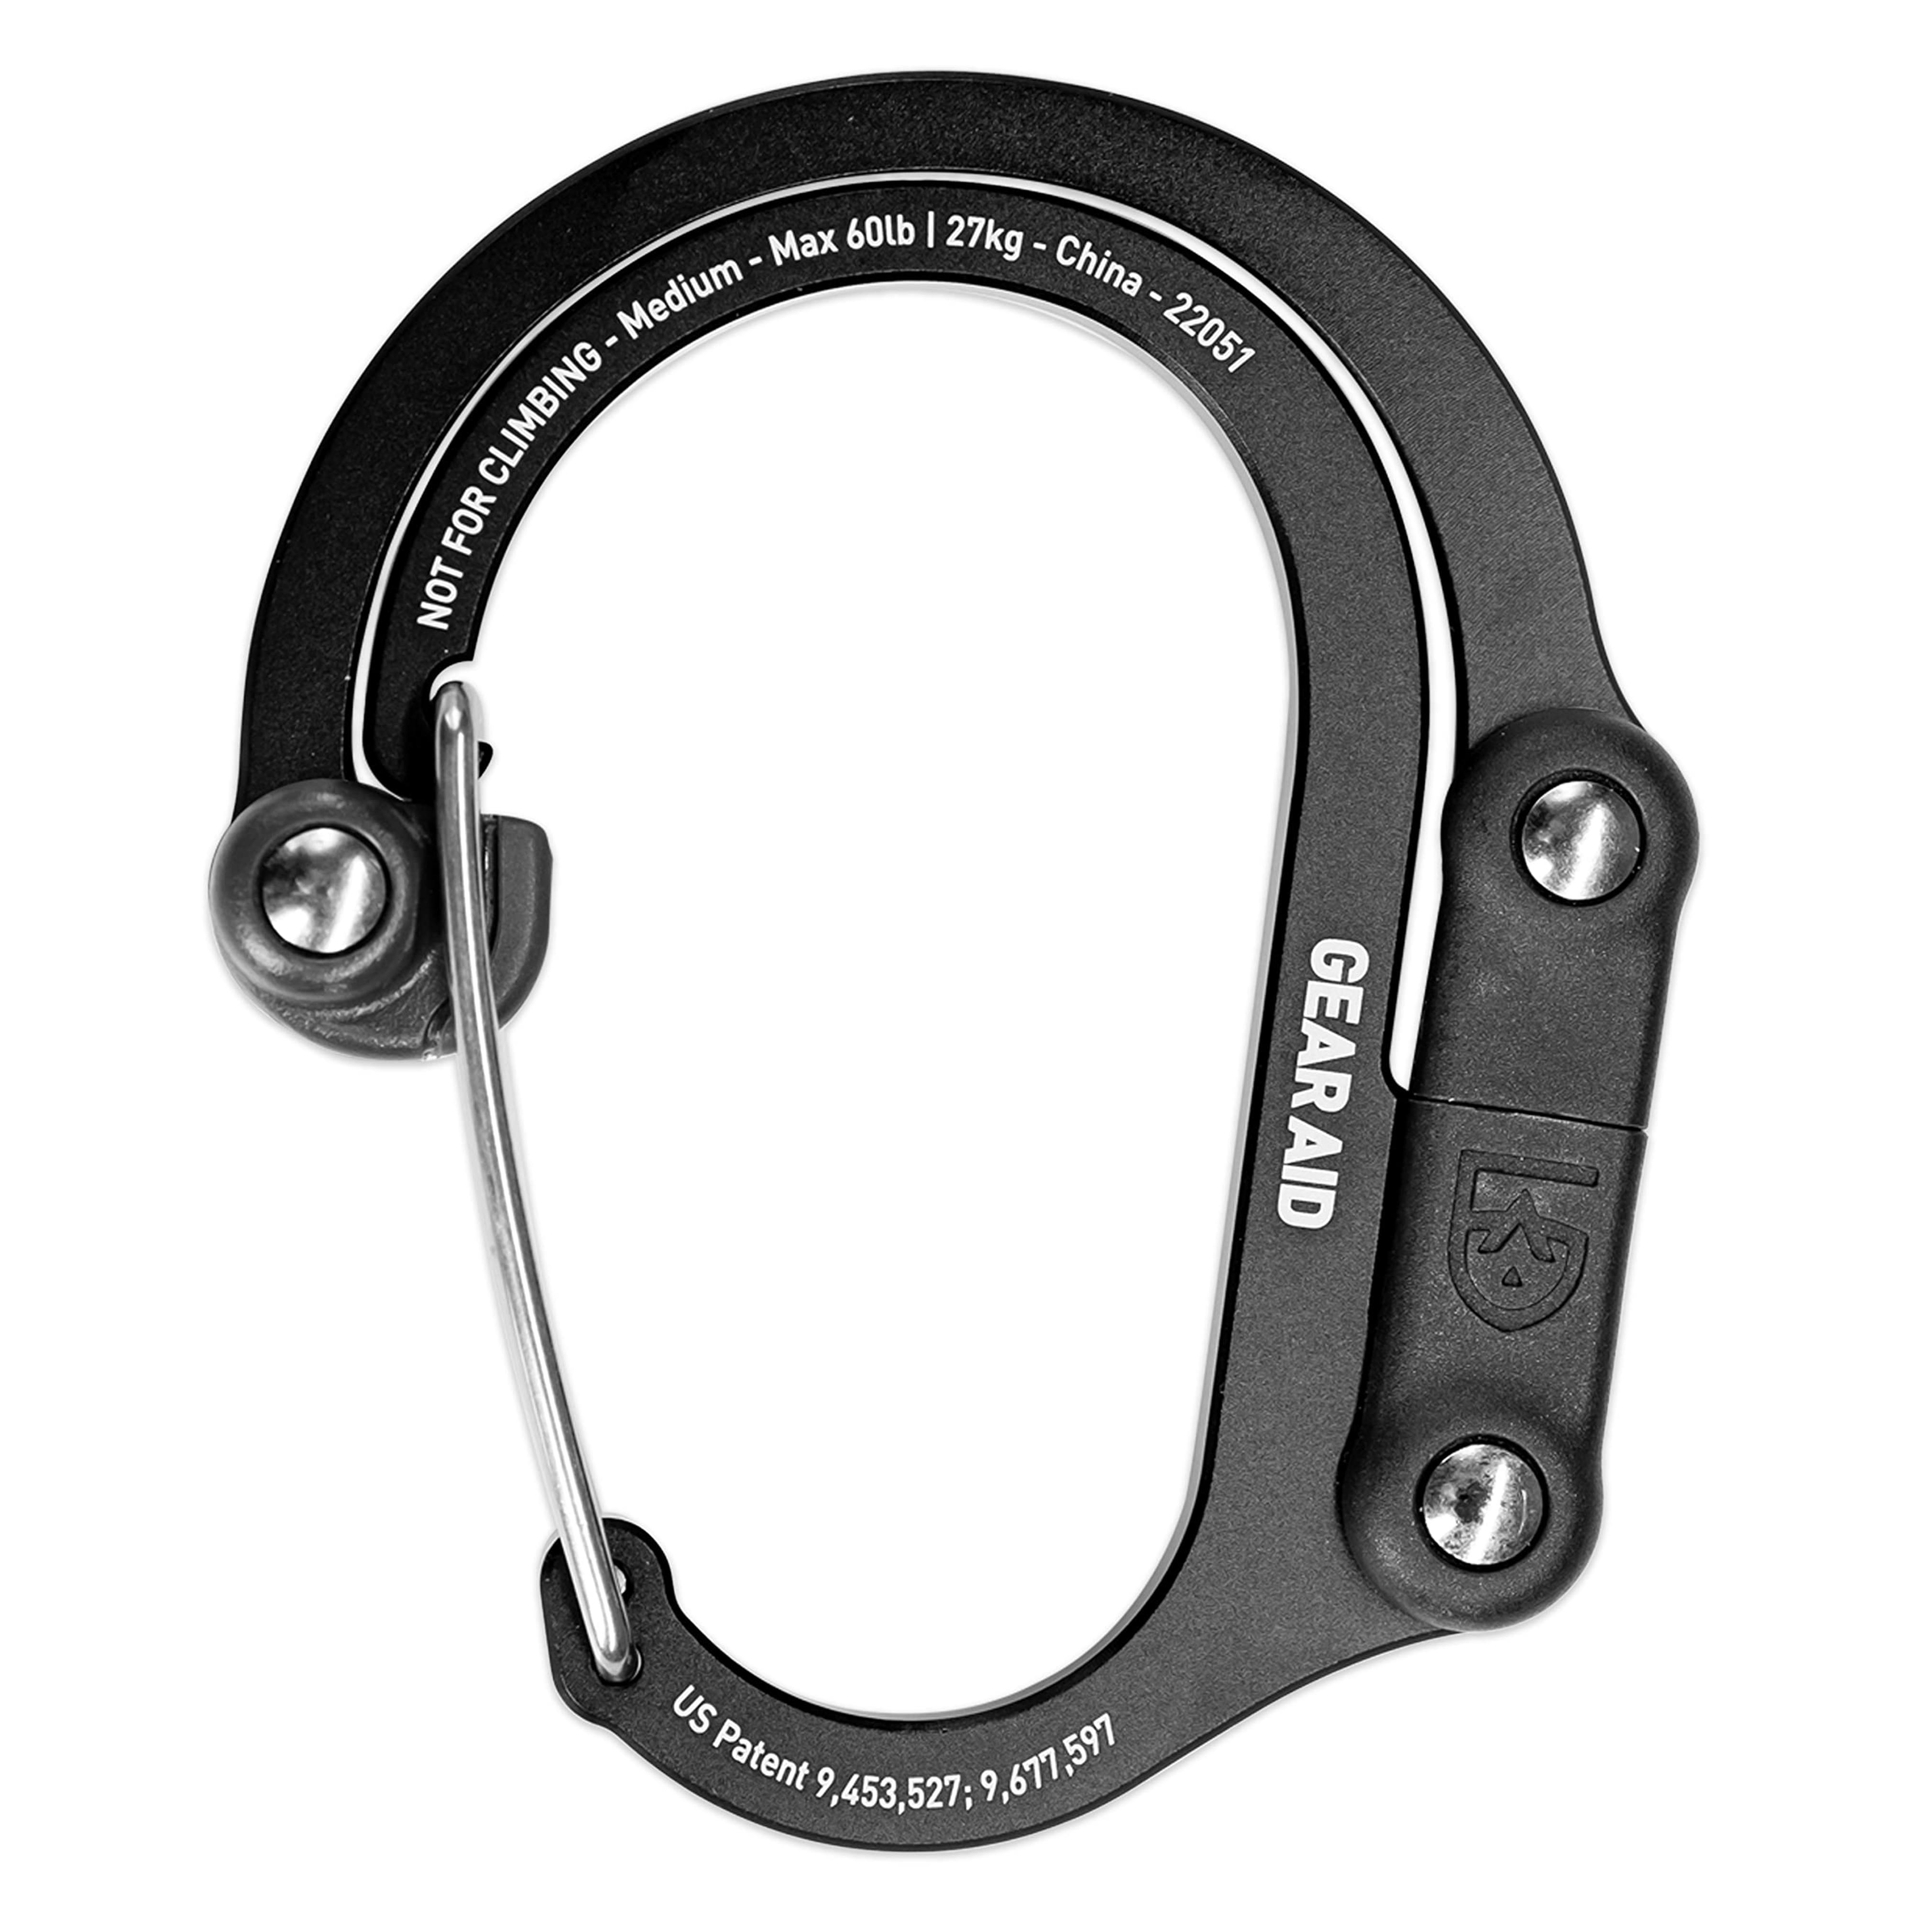 Amazon.com: GEAR AID HEROCLIP Carabiner Clip and Hook (Medium) for Camping, Backpack, and Garage, Stealth Black : Sports & Outdoors